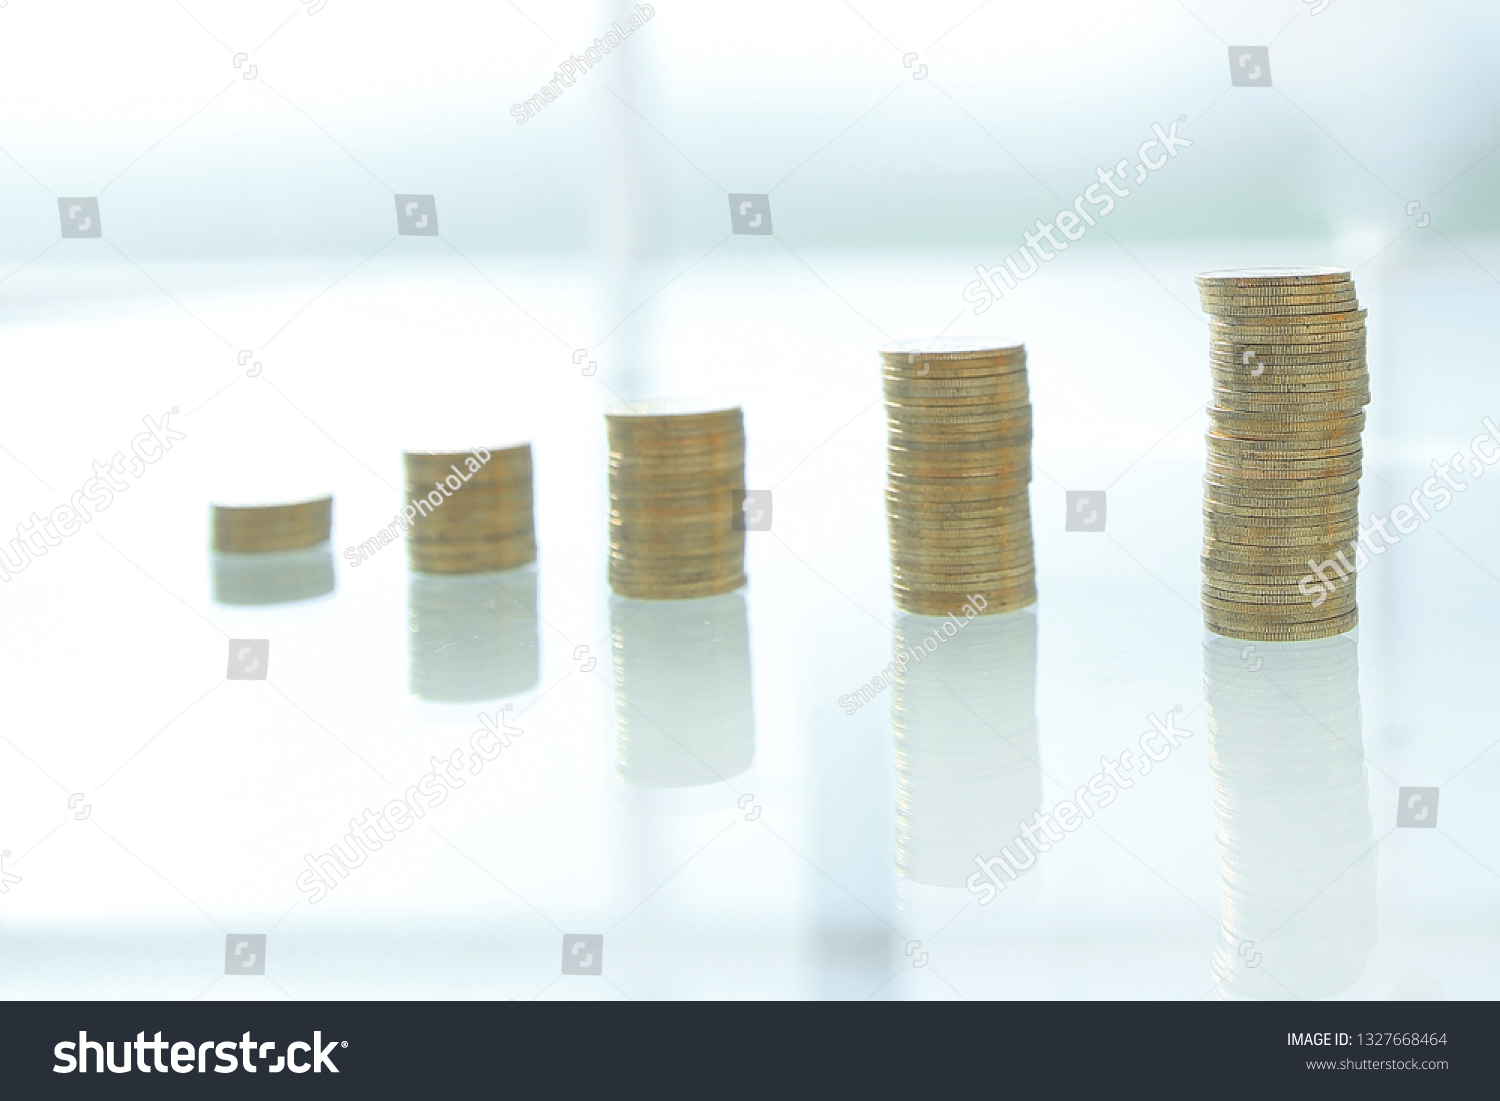 close up. businessman stacking coins in stacks on a glass table #1327668464